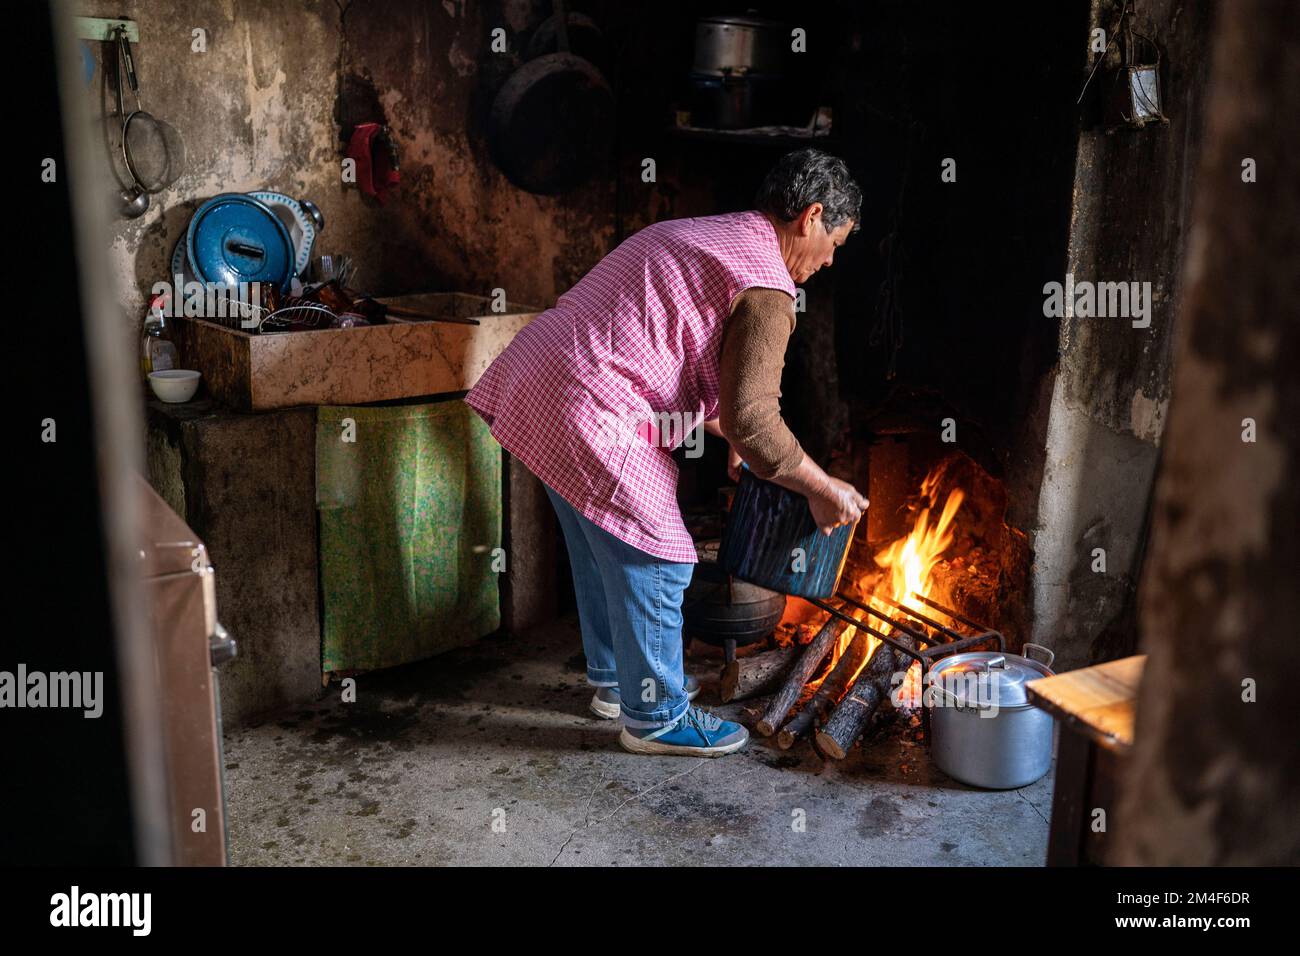 Woman cooking on open fire in a small old-fashioned kitchen in a country house Stock Photo